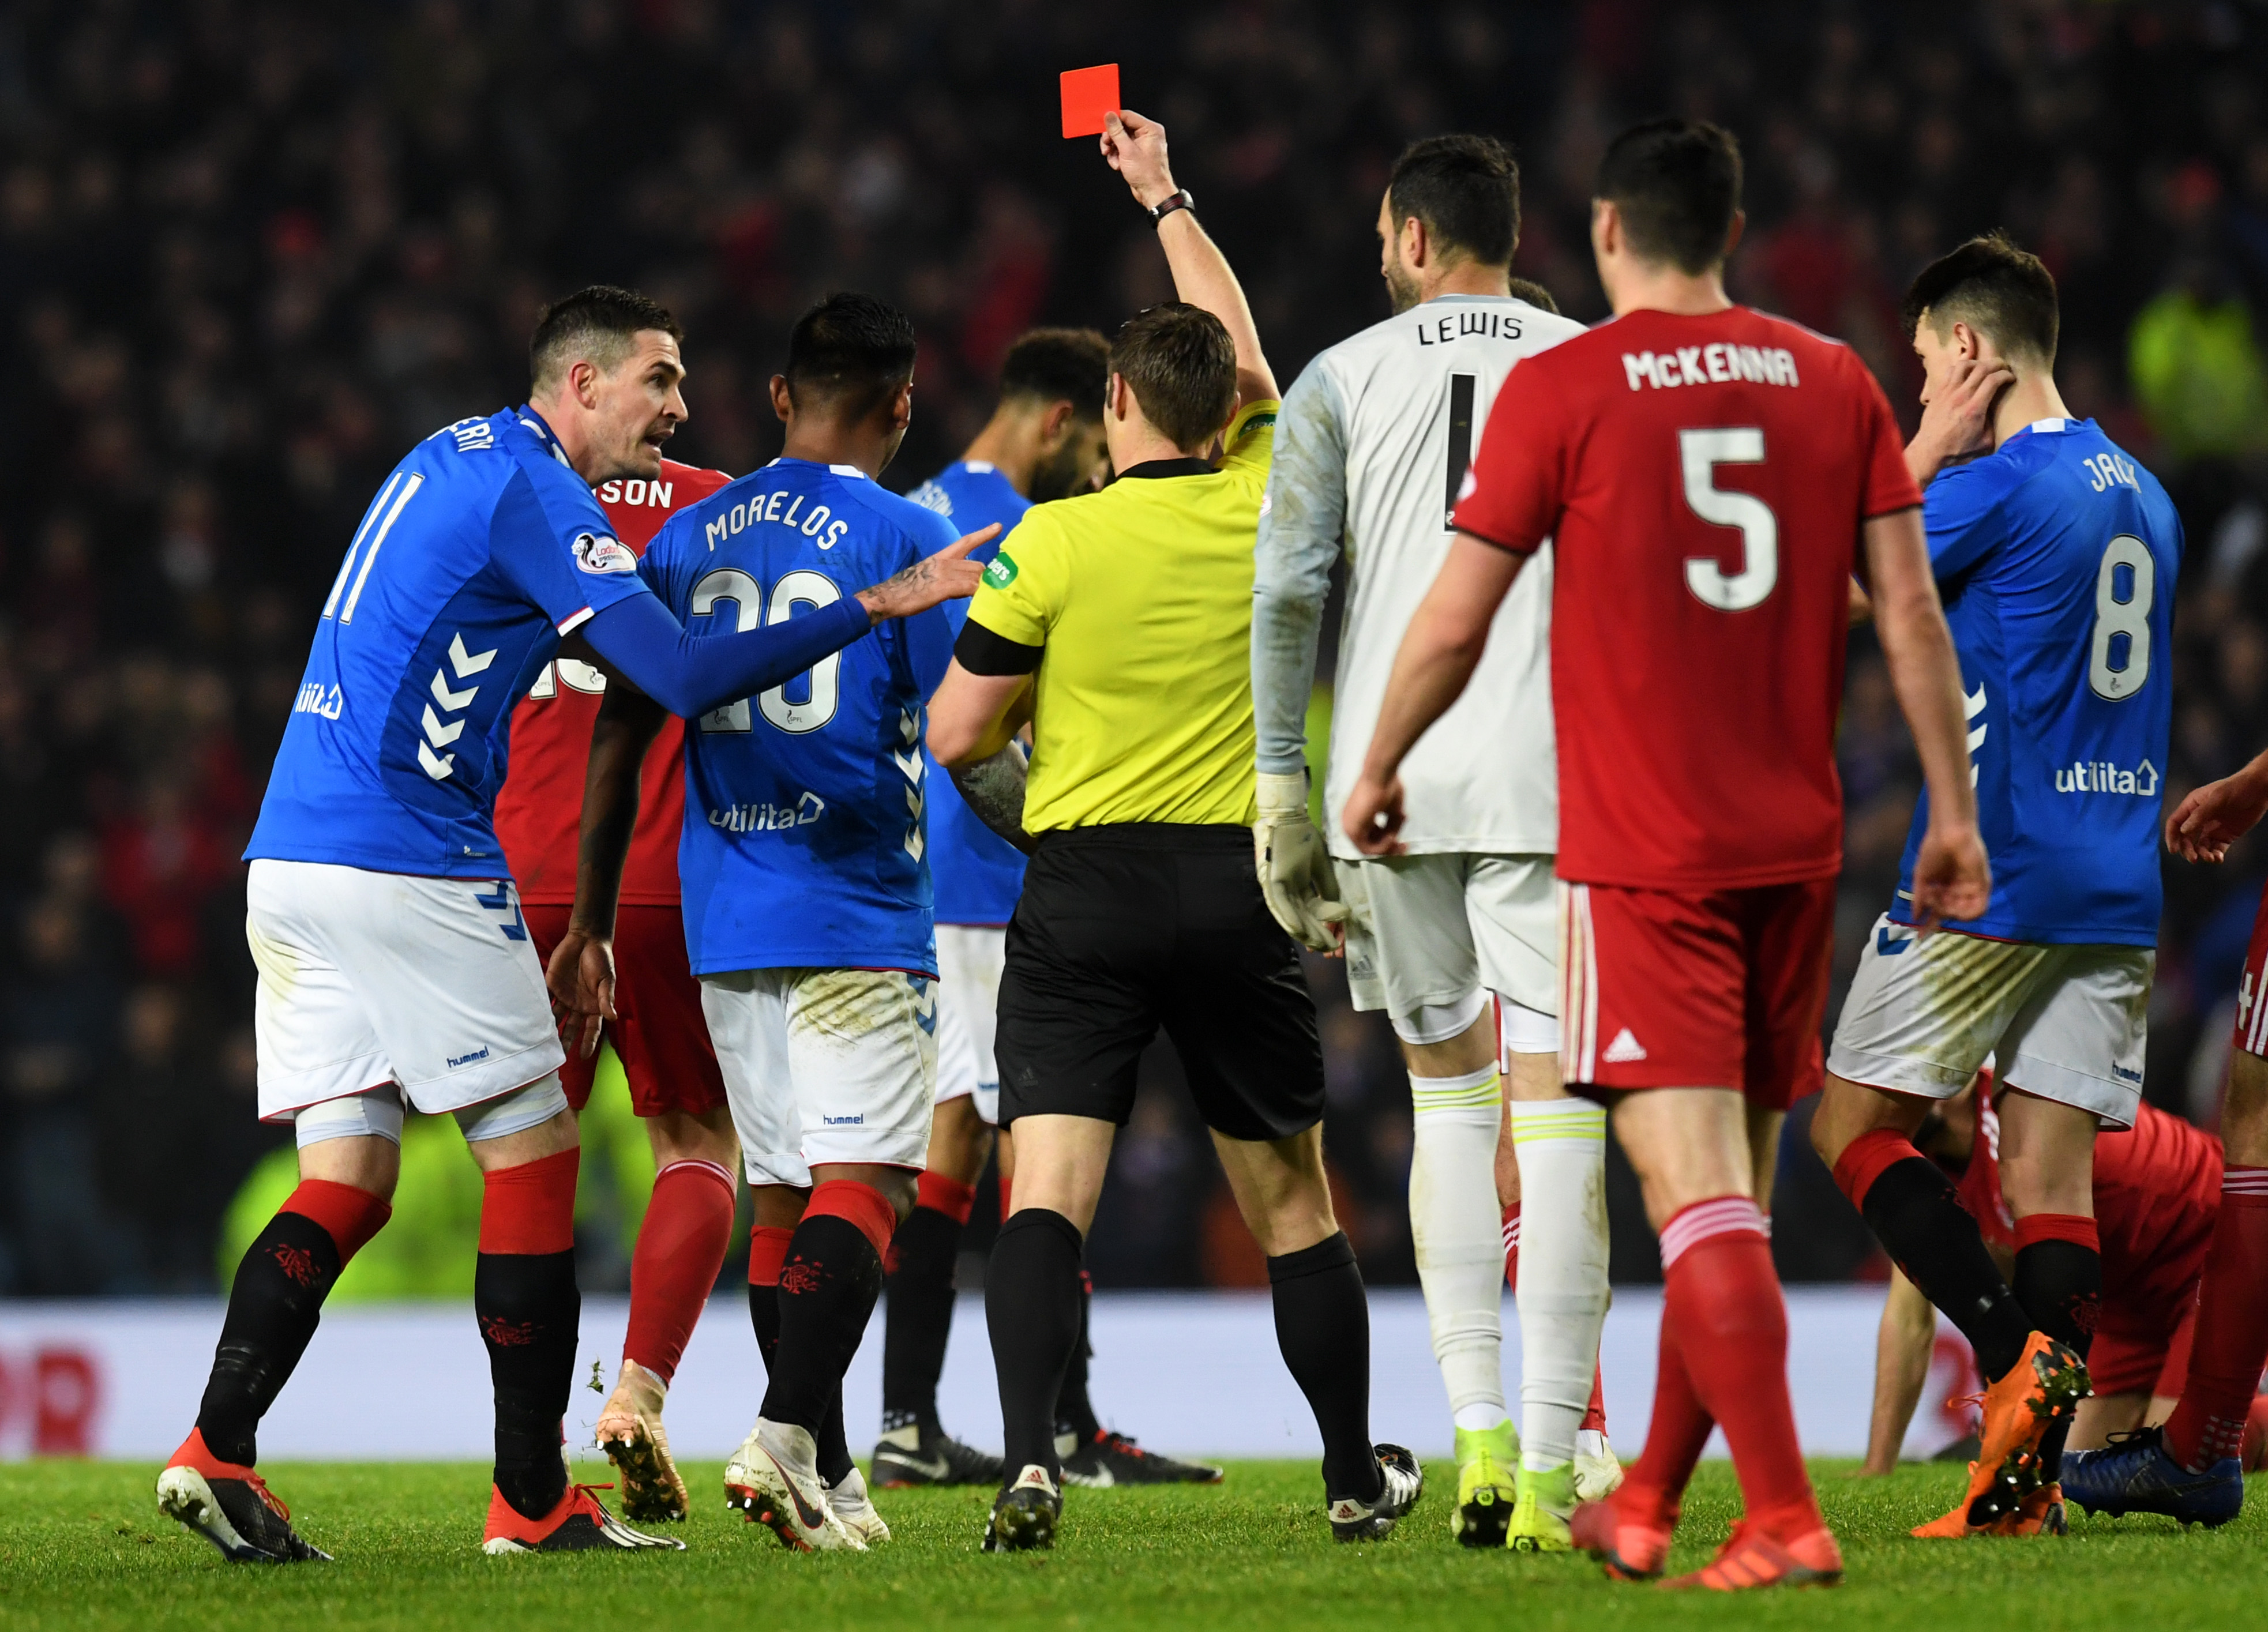 Aberdeen could face Rangers again in the Scottish Cup.